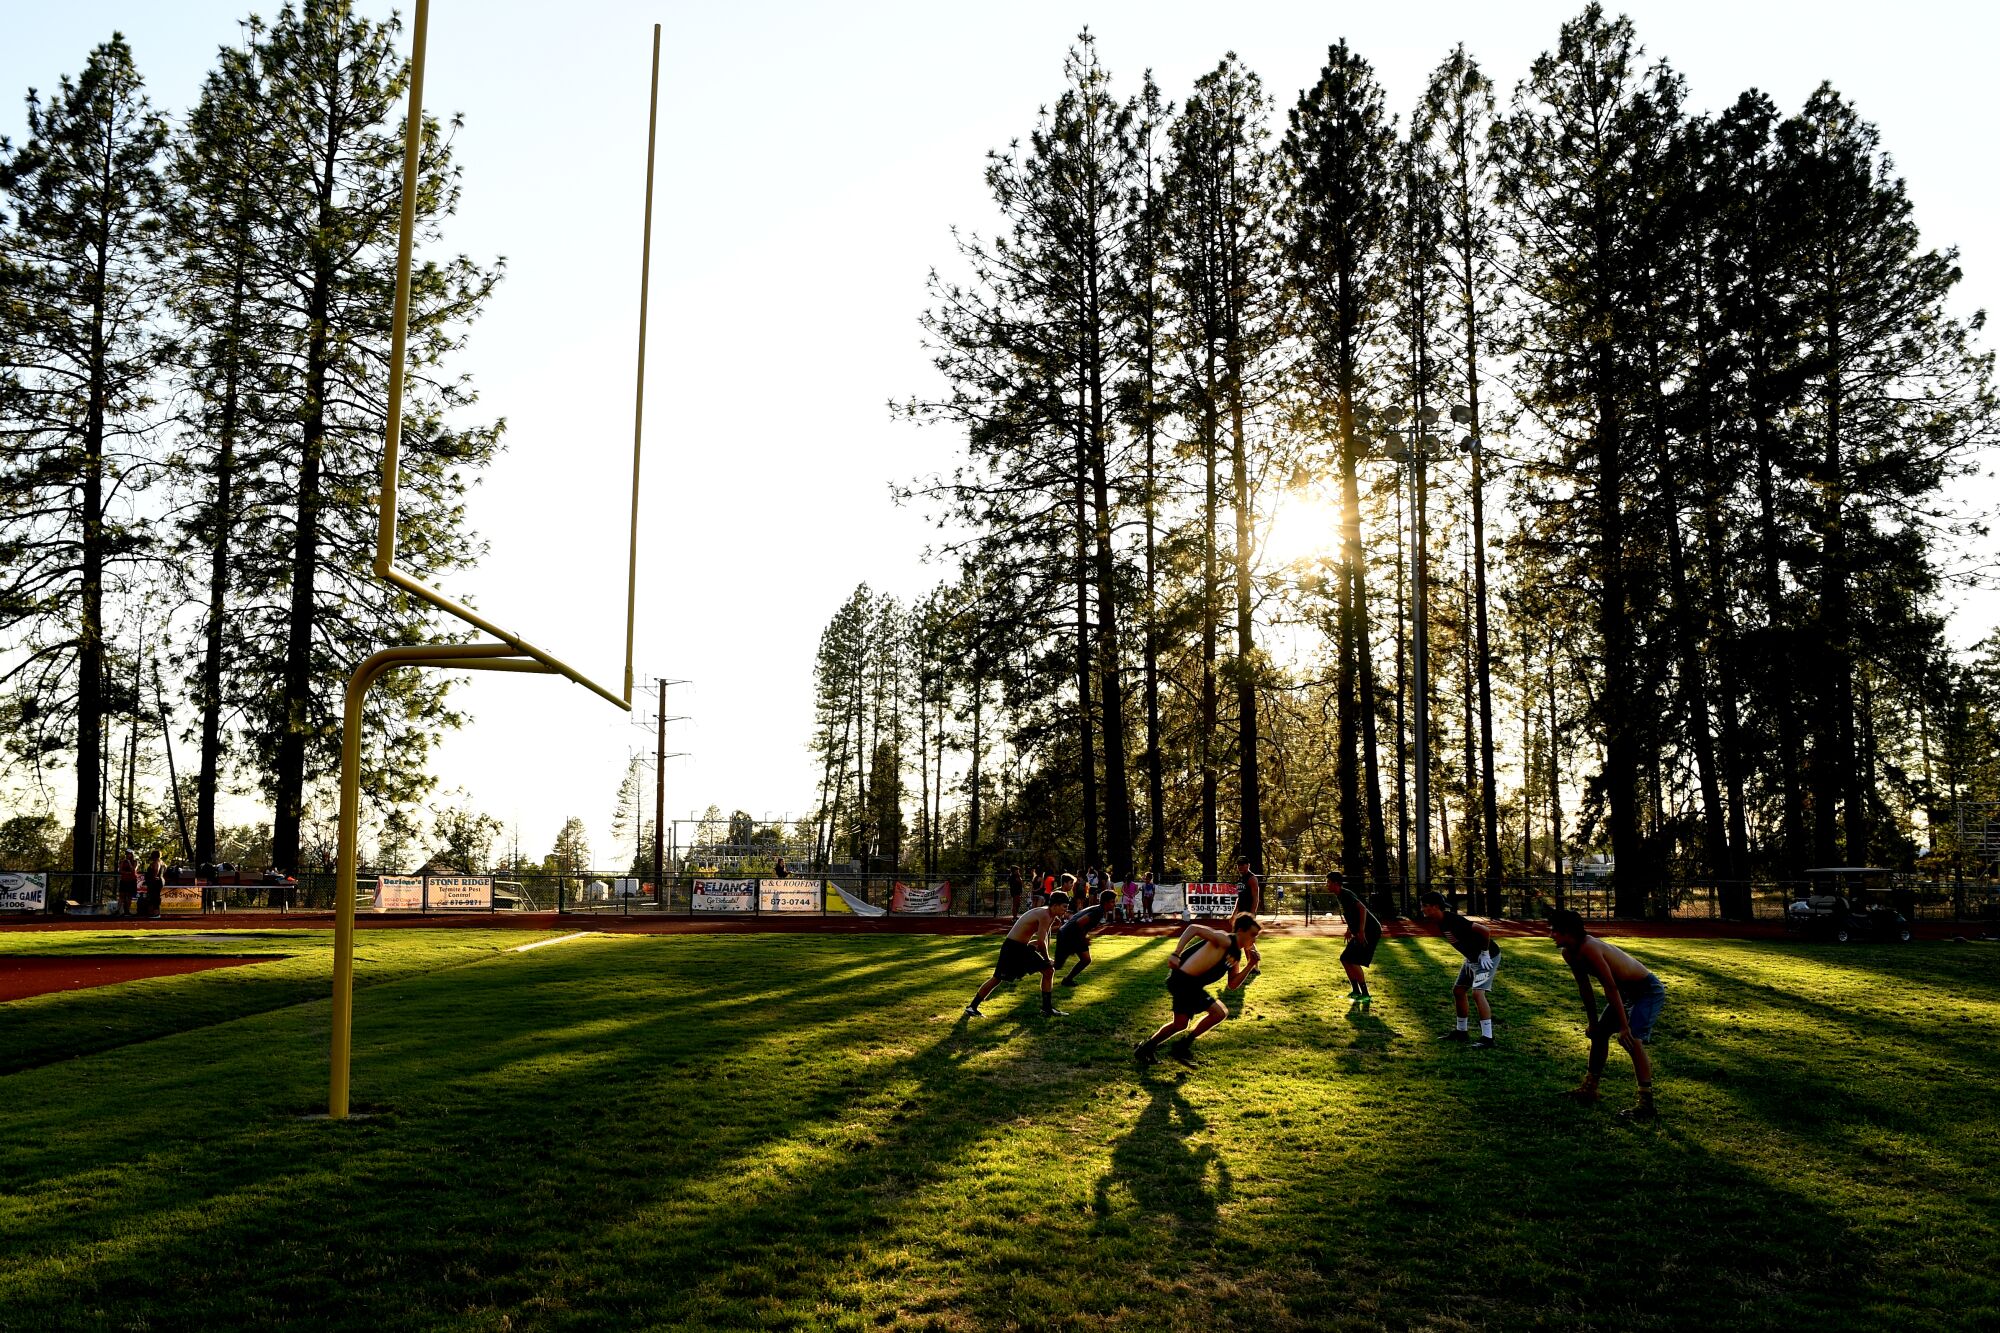 Paradise High football players practice in the late afternoon in preparation for the upcoming season.